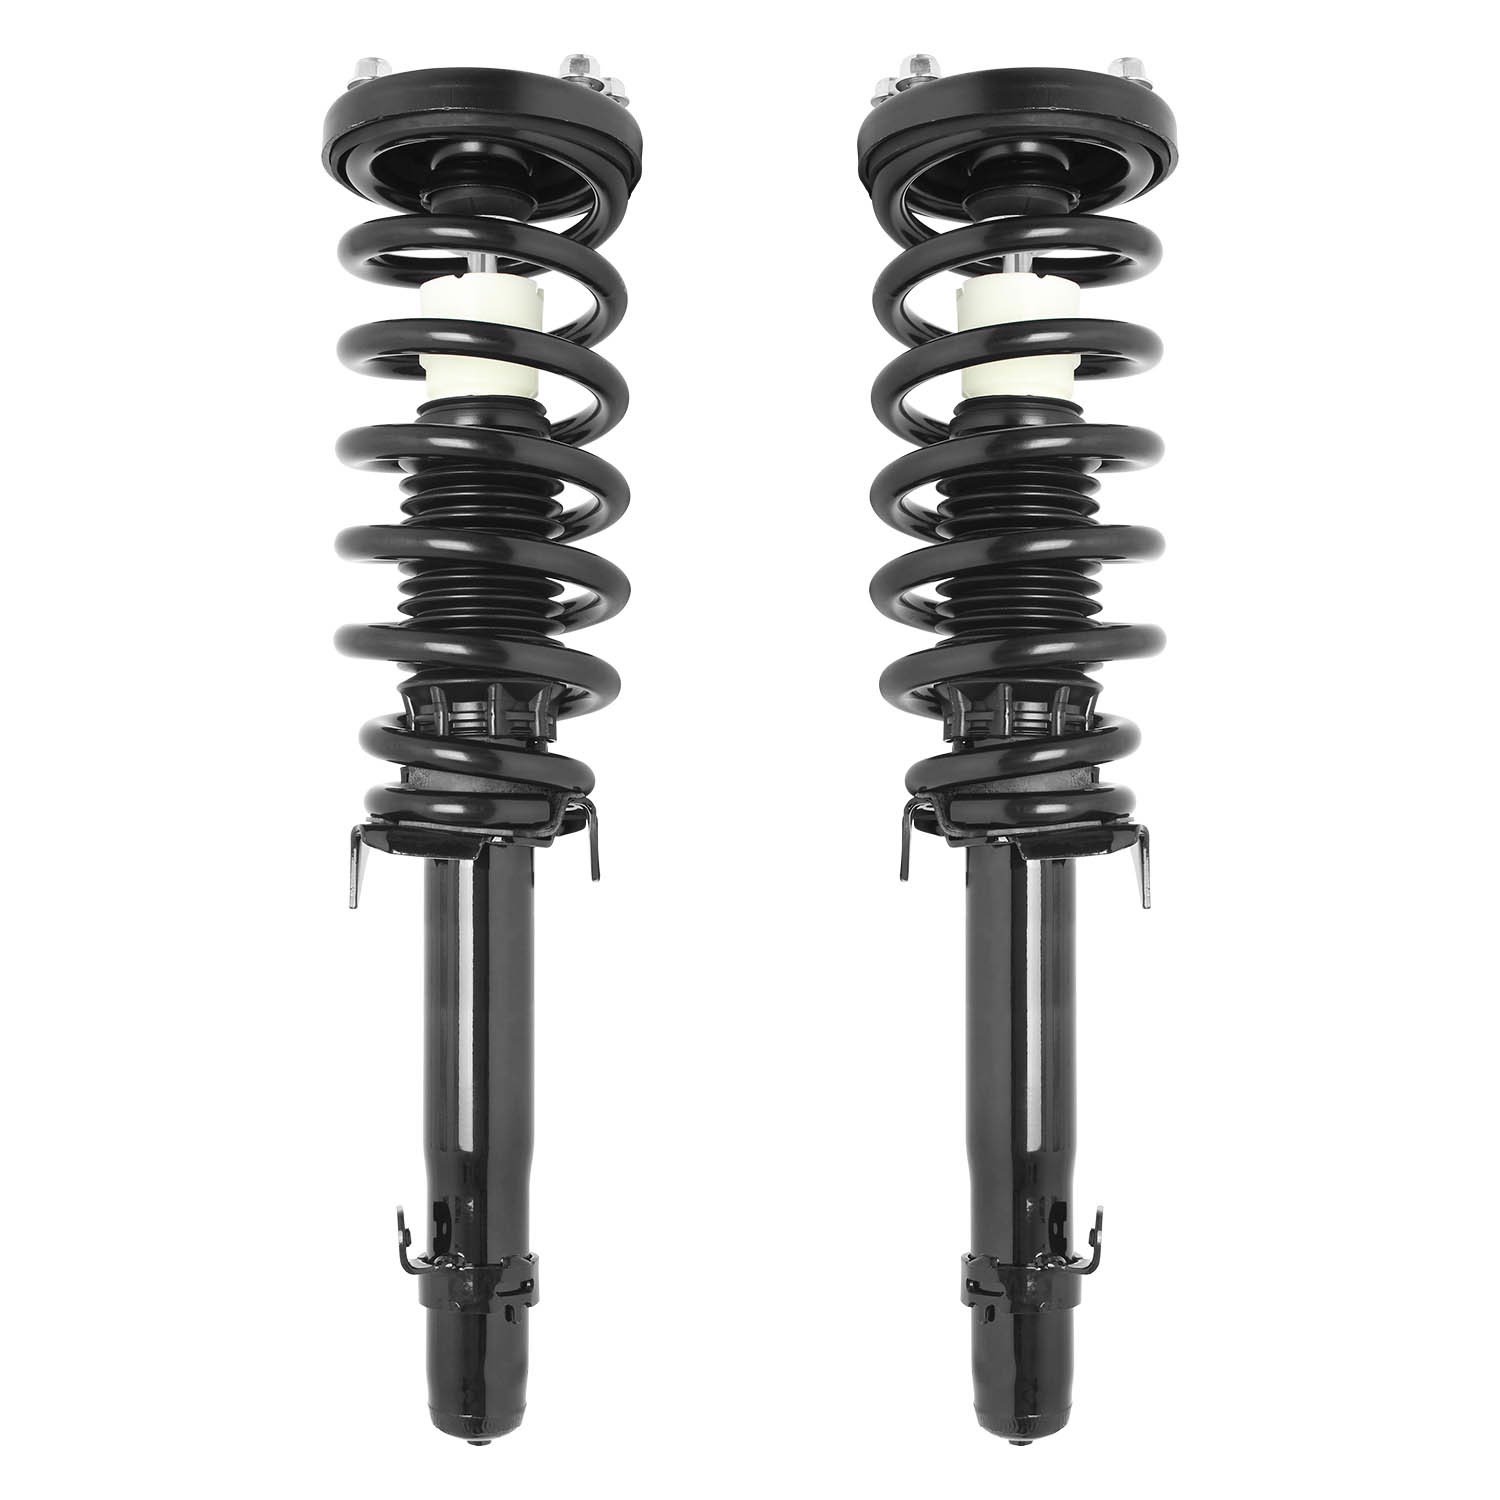 2-11825-11826-001 Suspension Strut & Coil Spring Assembly Set Fits Select Acura TL